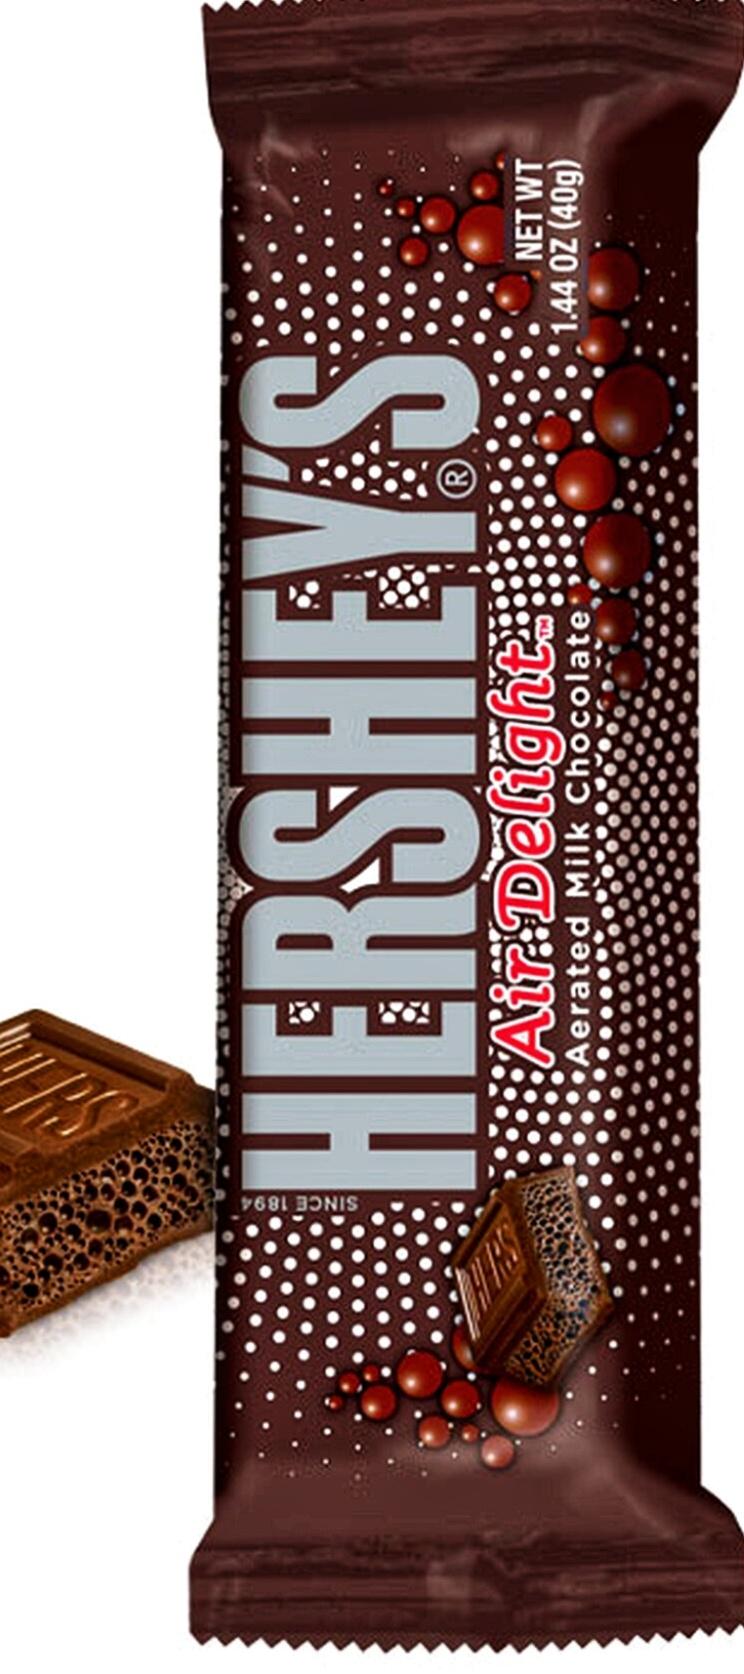 Hershey's Air Delight Chocolate